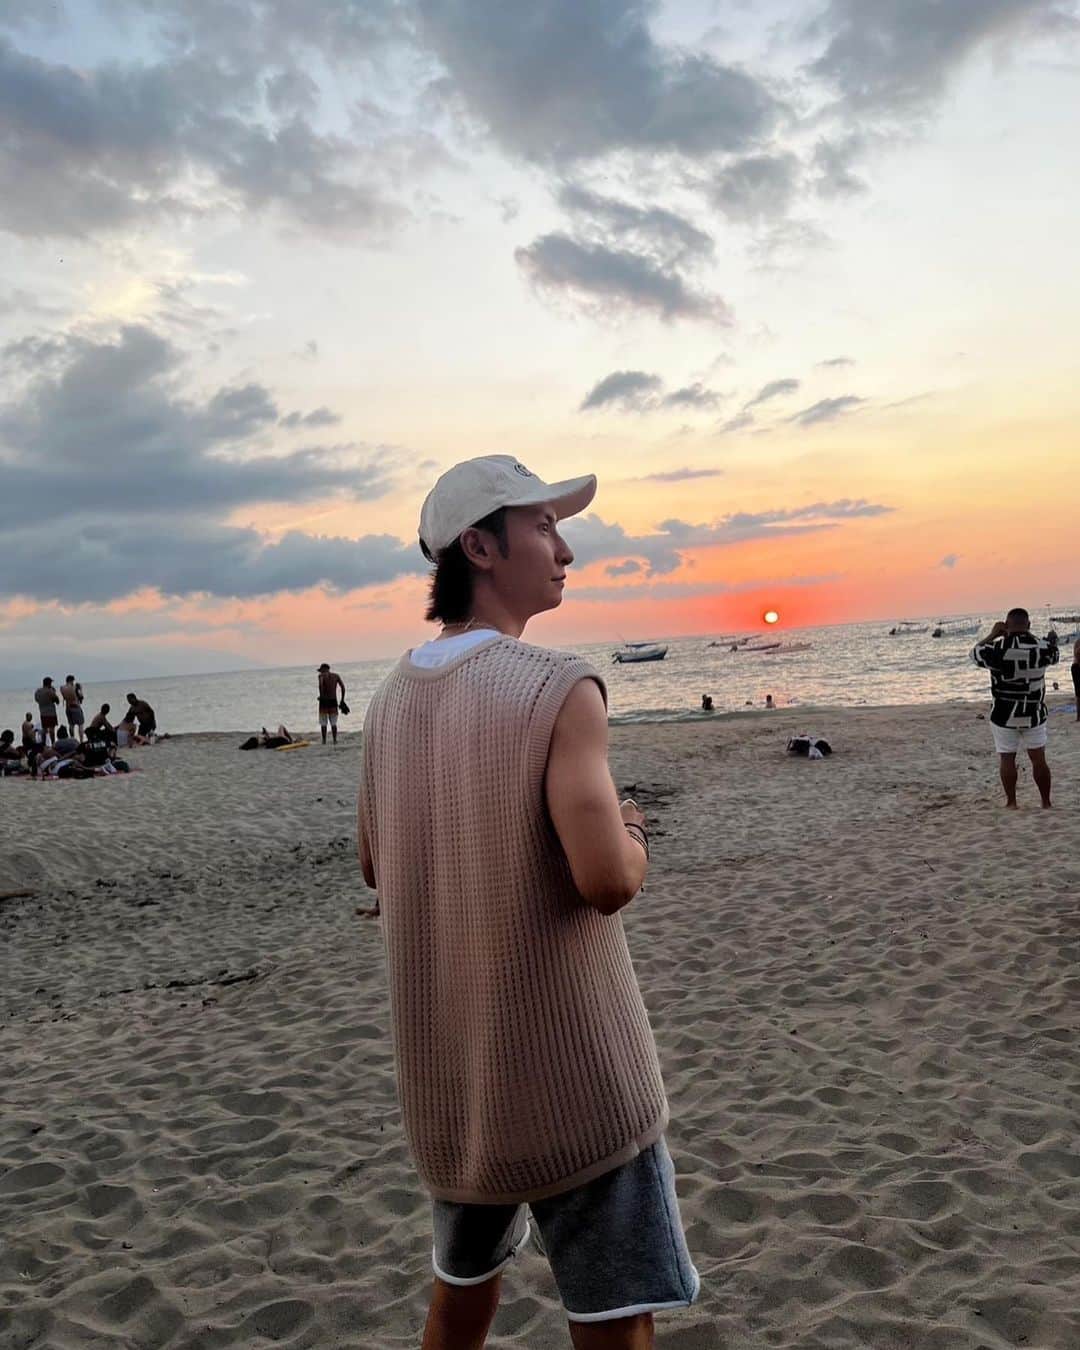 與真司郎さんのインスタグラム写真 - (與真司郎Instagram)「September 14th   It’s been 18 years since I’ve debuted and 20 years since I’ve entered the entertainment industry. The sentiment of “challenging everything in life” remains unchanged even now, and I myself am undertaking significant challenges to this day. The journey is far from over. I would like to continue to meet many more people, experience many more things and continue to grow as a person. I don't know how far I’ll be able to go, but I feel grateful for being in the position I’m in today. I’m working towards becoming a person that can provide people with courage and hope in their lives🙏  I was feeling a little stuck with work, so I went to Mexico for the first time with friends to refresh myself😝✈️🇲🇽 It was an amazing trip and I felt very moved by the Mexican culture and the warmth of the people. It was a great learning experience for me.  To my fans!! Thank you very much for your continued support!! I really miss you guys every day🥹 Hope you guys are doing well!!  9月14日  デビューから18年が経ちました。芸能界に入ってからは20年。  「全てのことに挑戦する」  その想いは今も変わらず、 僕自身も、大きな挑戦をしています。 まだまだ、終わらない旅が続きます。  これからも、たくさんの人と出逢って、たくさんのことを経験して、人としても成長していきたいなと思っています。  そして、どこまで僕ができるかわからないけれど、1人でも多くの人が勇気と希望を持つキッカケとなる存在になれるように、これからもたくさんの人に感謝しながら生きていきたいと思っています🙏  写真は仕事が煮詰まってきたので、リフレッシュに友達と初めてのメキシコに行ってきたよー😝✈️🇲🇽  メキシコのカルチャーと人々の温かさに感動し、本当に色んなことを学んだすごくいい旅でした。  ファンのみんな！！本当にずっとずっと応援してくれてありがとう！！ みんなに会いたいなとホンマに毎日思っています🥹 I miss you guys so much!! Hope you guys are doing well!!」9月14日 11時05分 - shinjiroatae1126